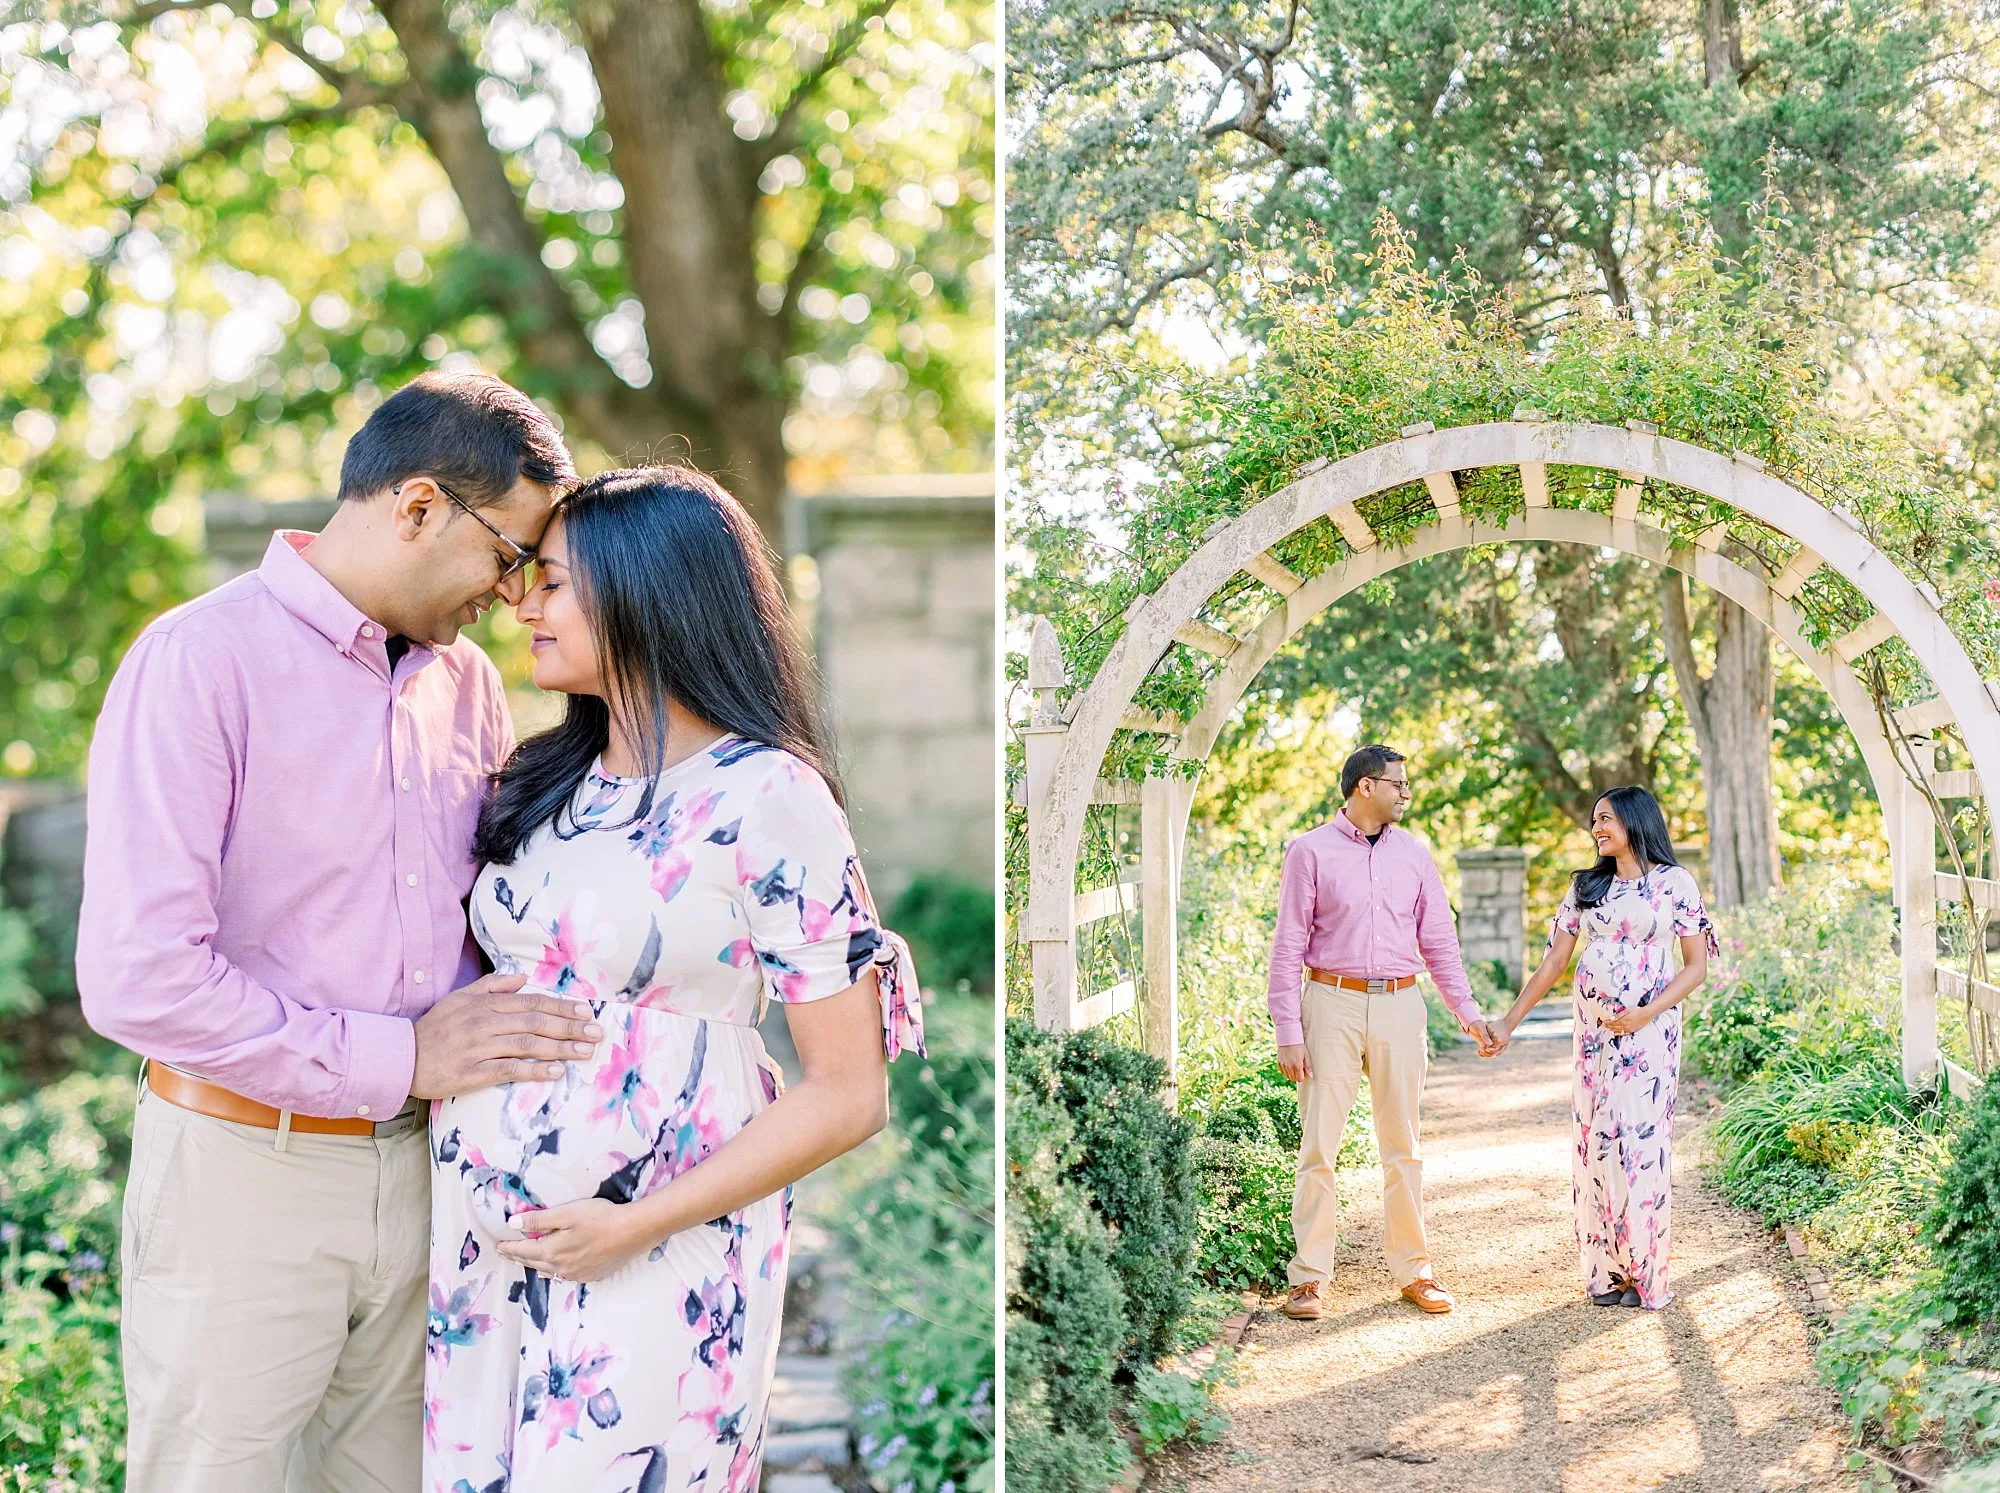 Maternity session in a garden